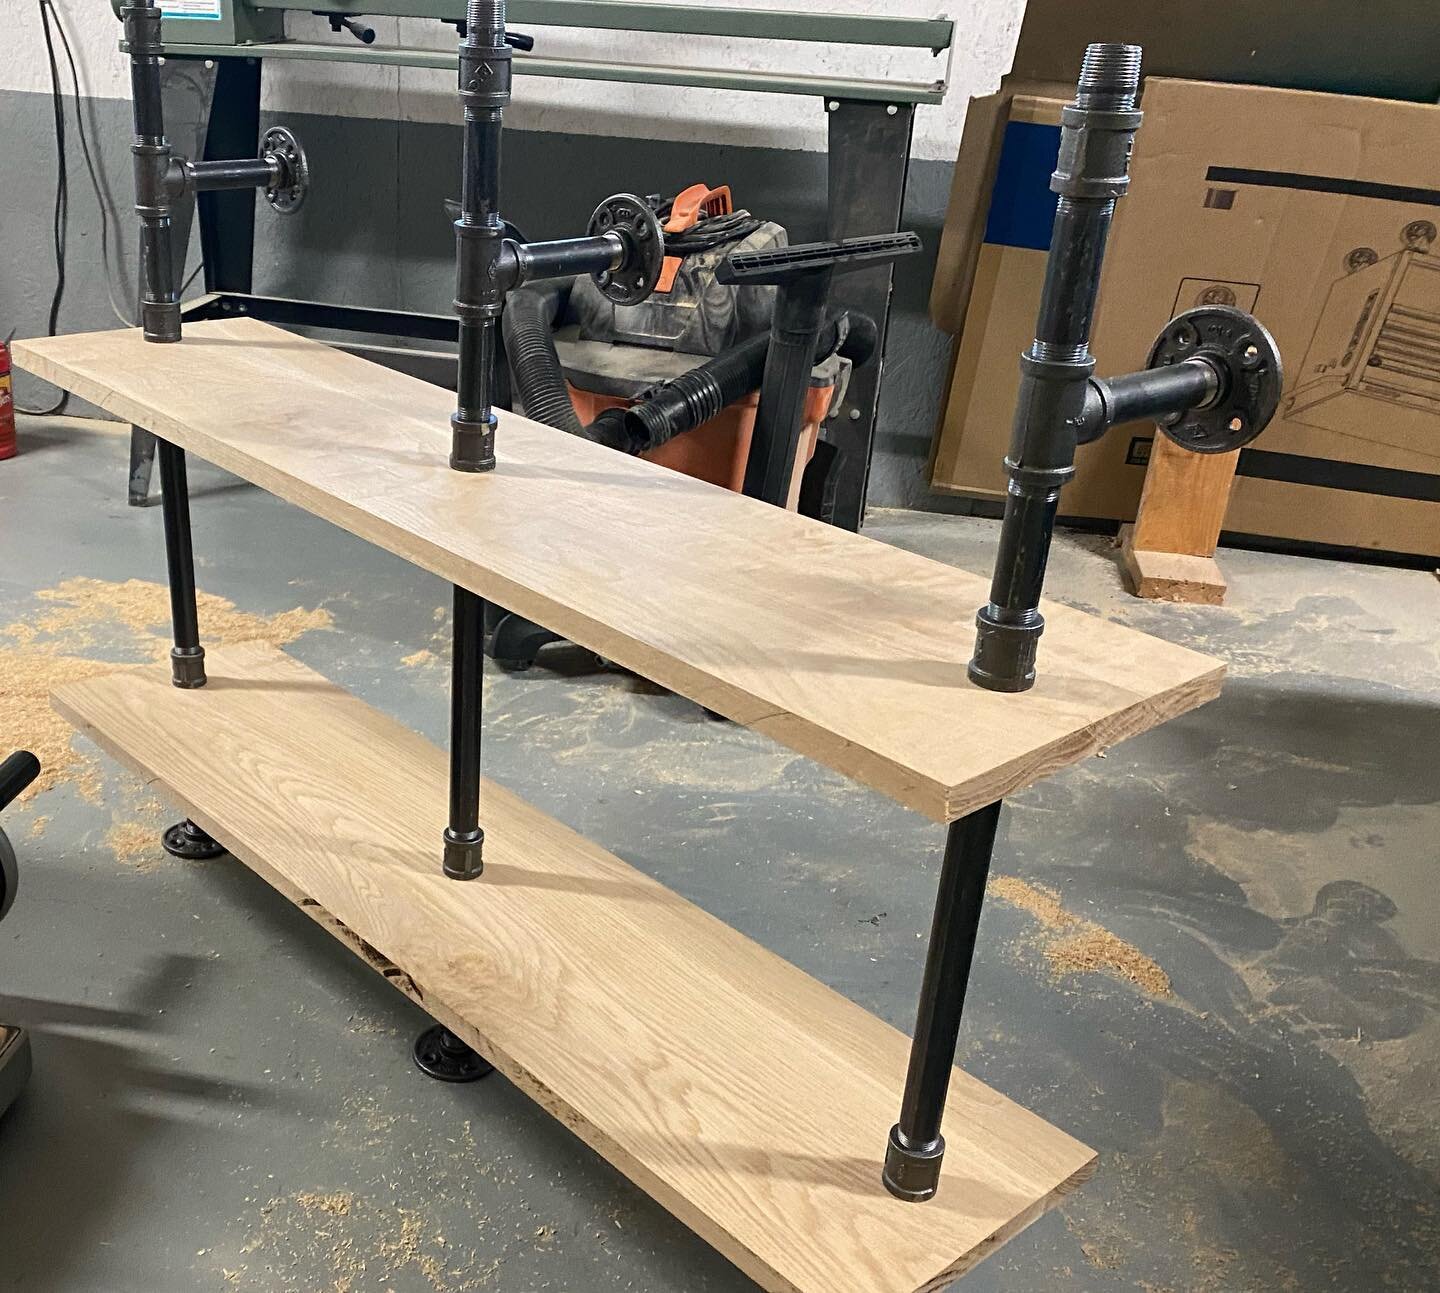 Test fits are an important part of the process! This piece will be ready for its new home soon! #woodfurniture #industrialdesign #handmade #woodworking #wooddesign #woodshop #entrepreneurship